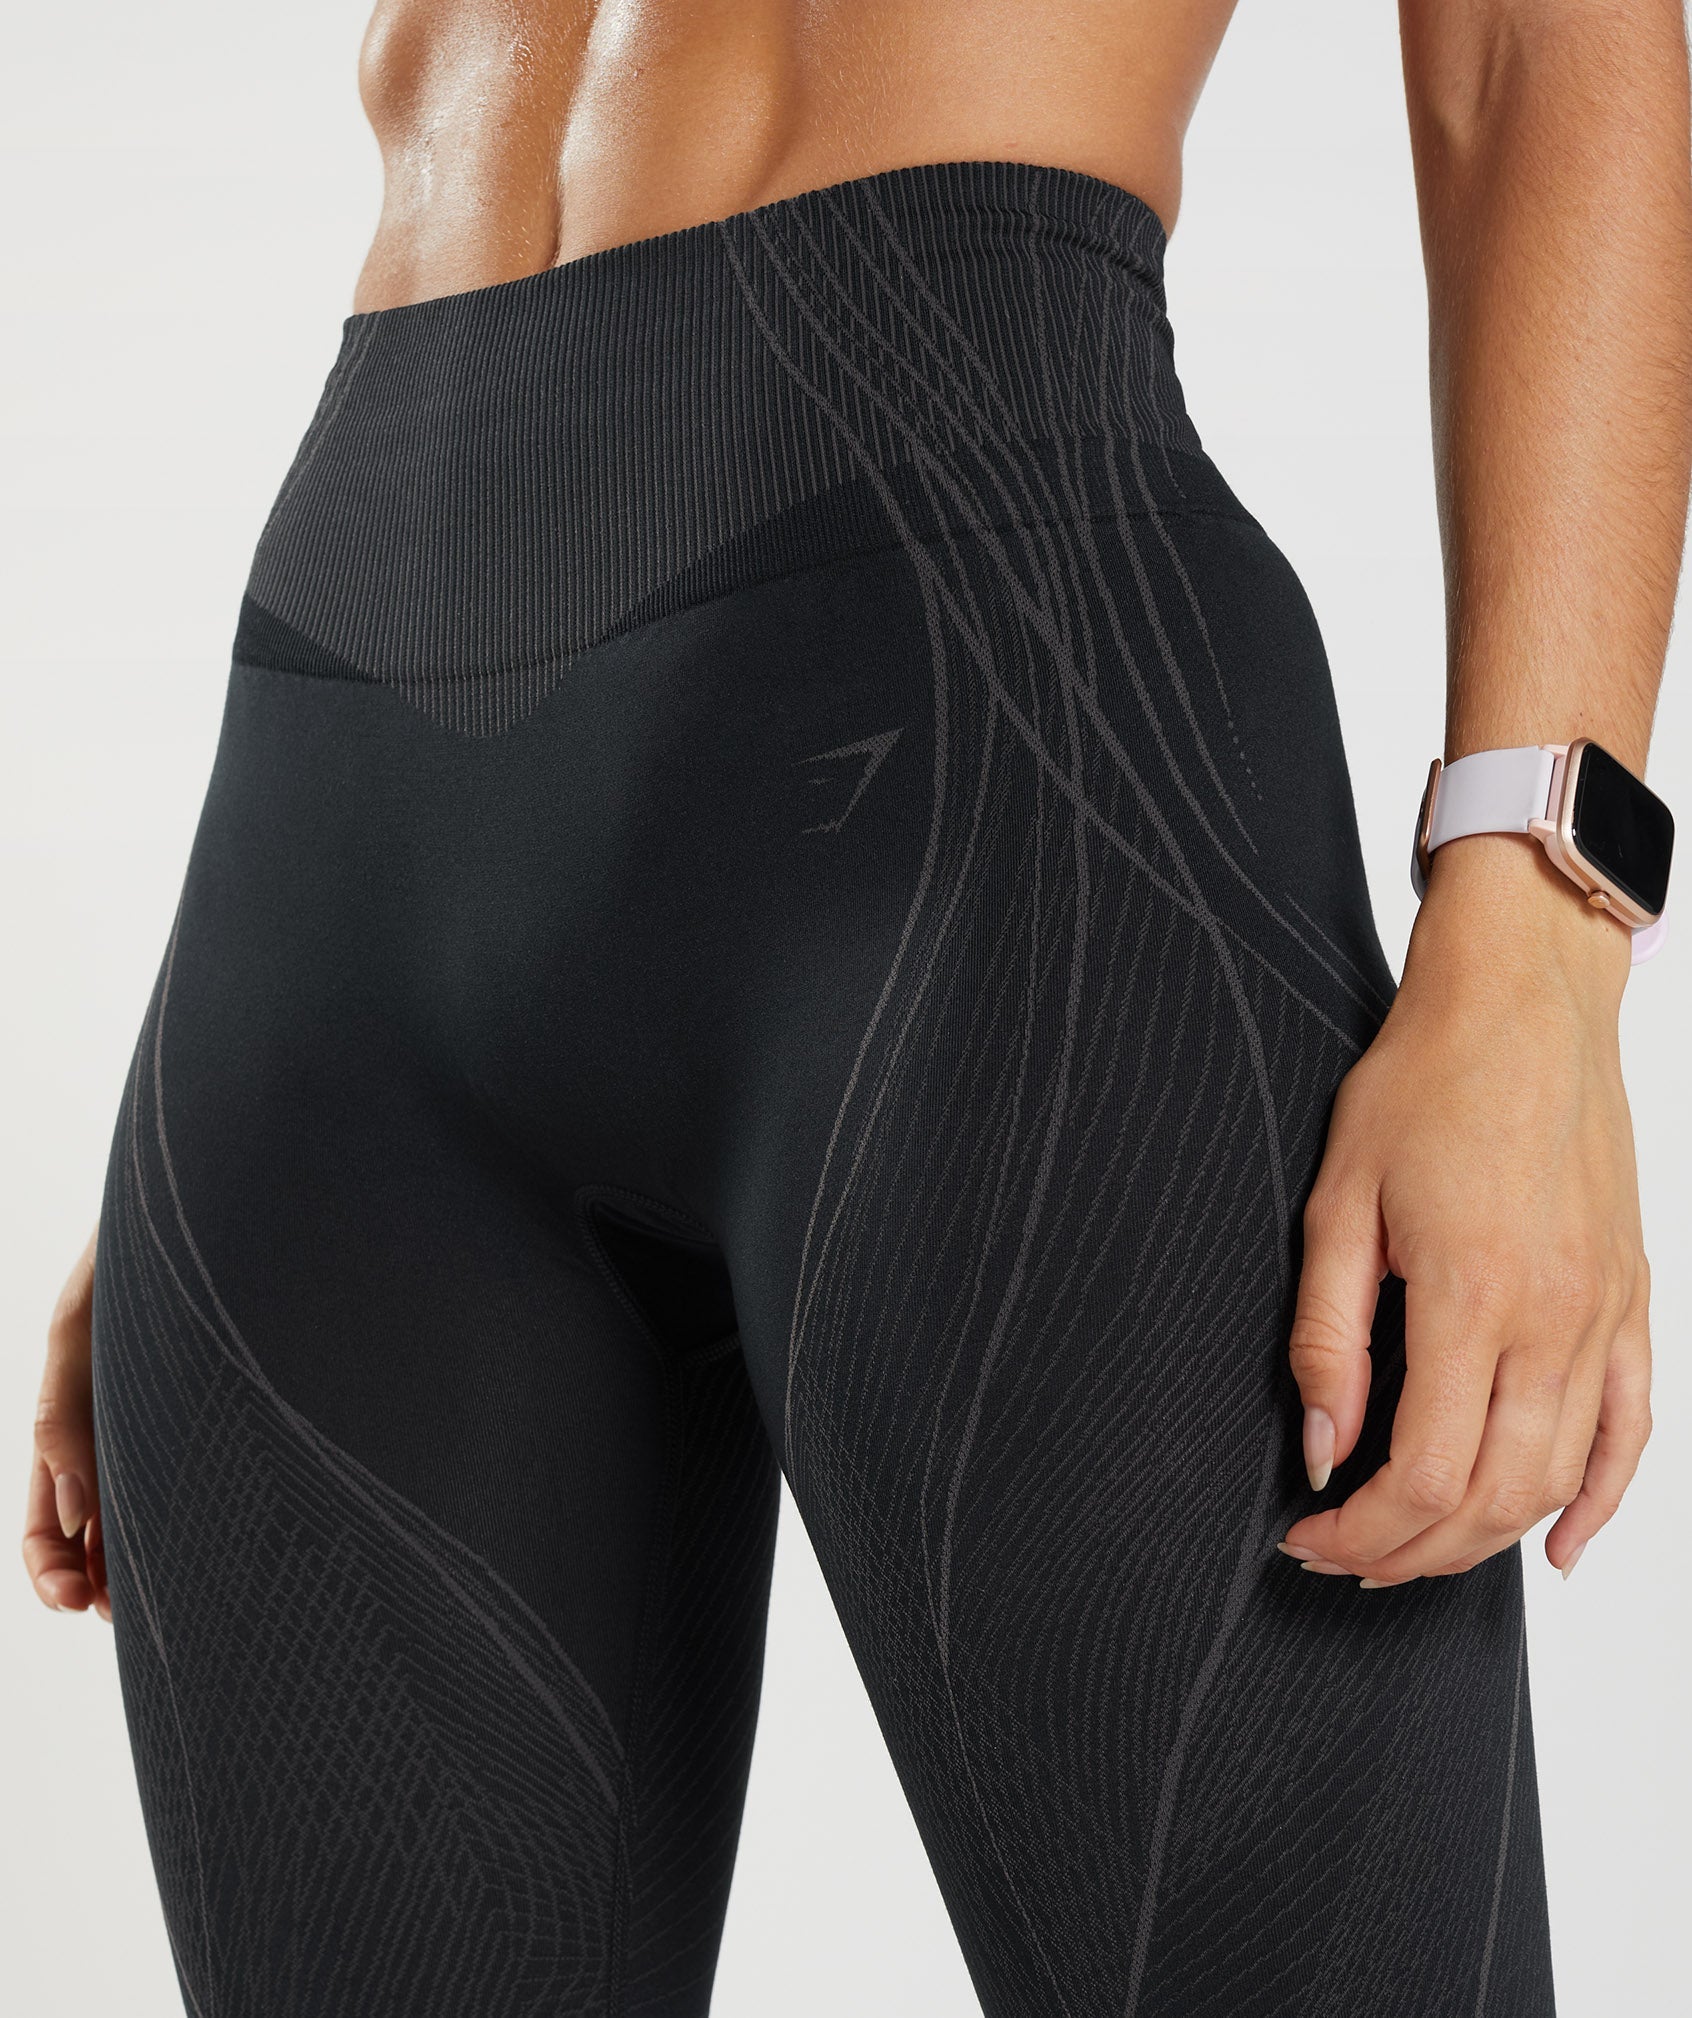 Gymshark Apex Seamless Low Rise Red Size L - $25 (44% Off Retail